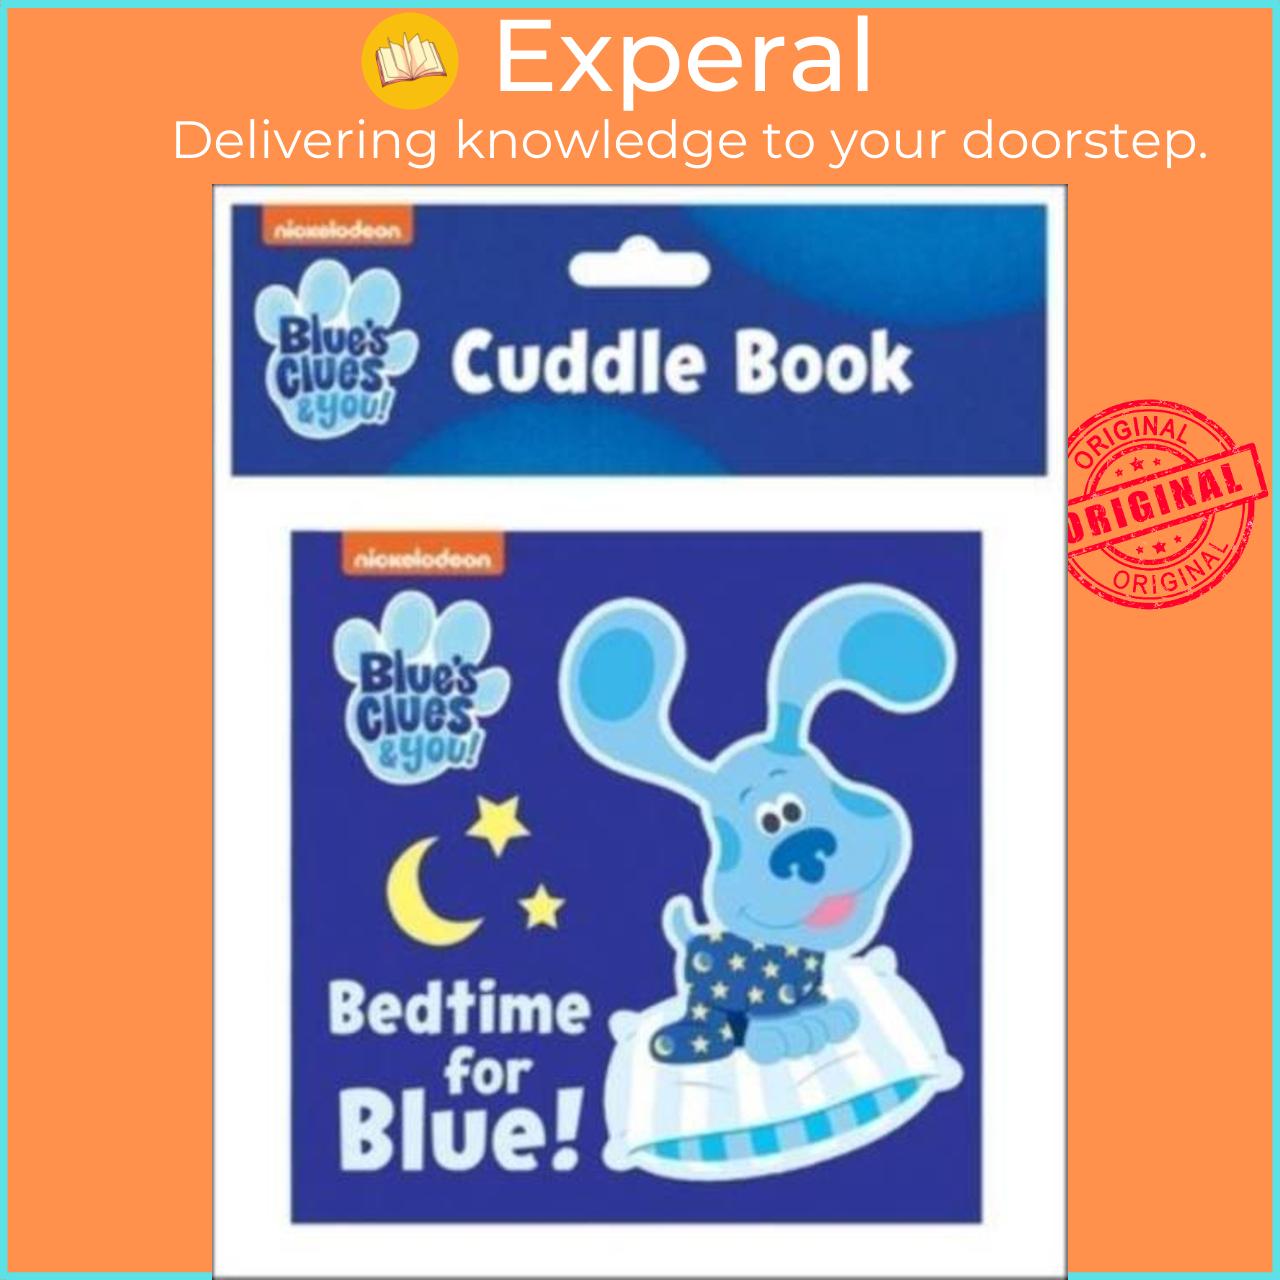 Sách - Nickelodeon Blue's Clues & You!: Bedtime for Blue! Cuddle Book by Jason Fruchter (UK edition, paperback)